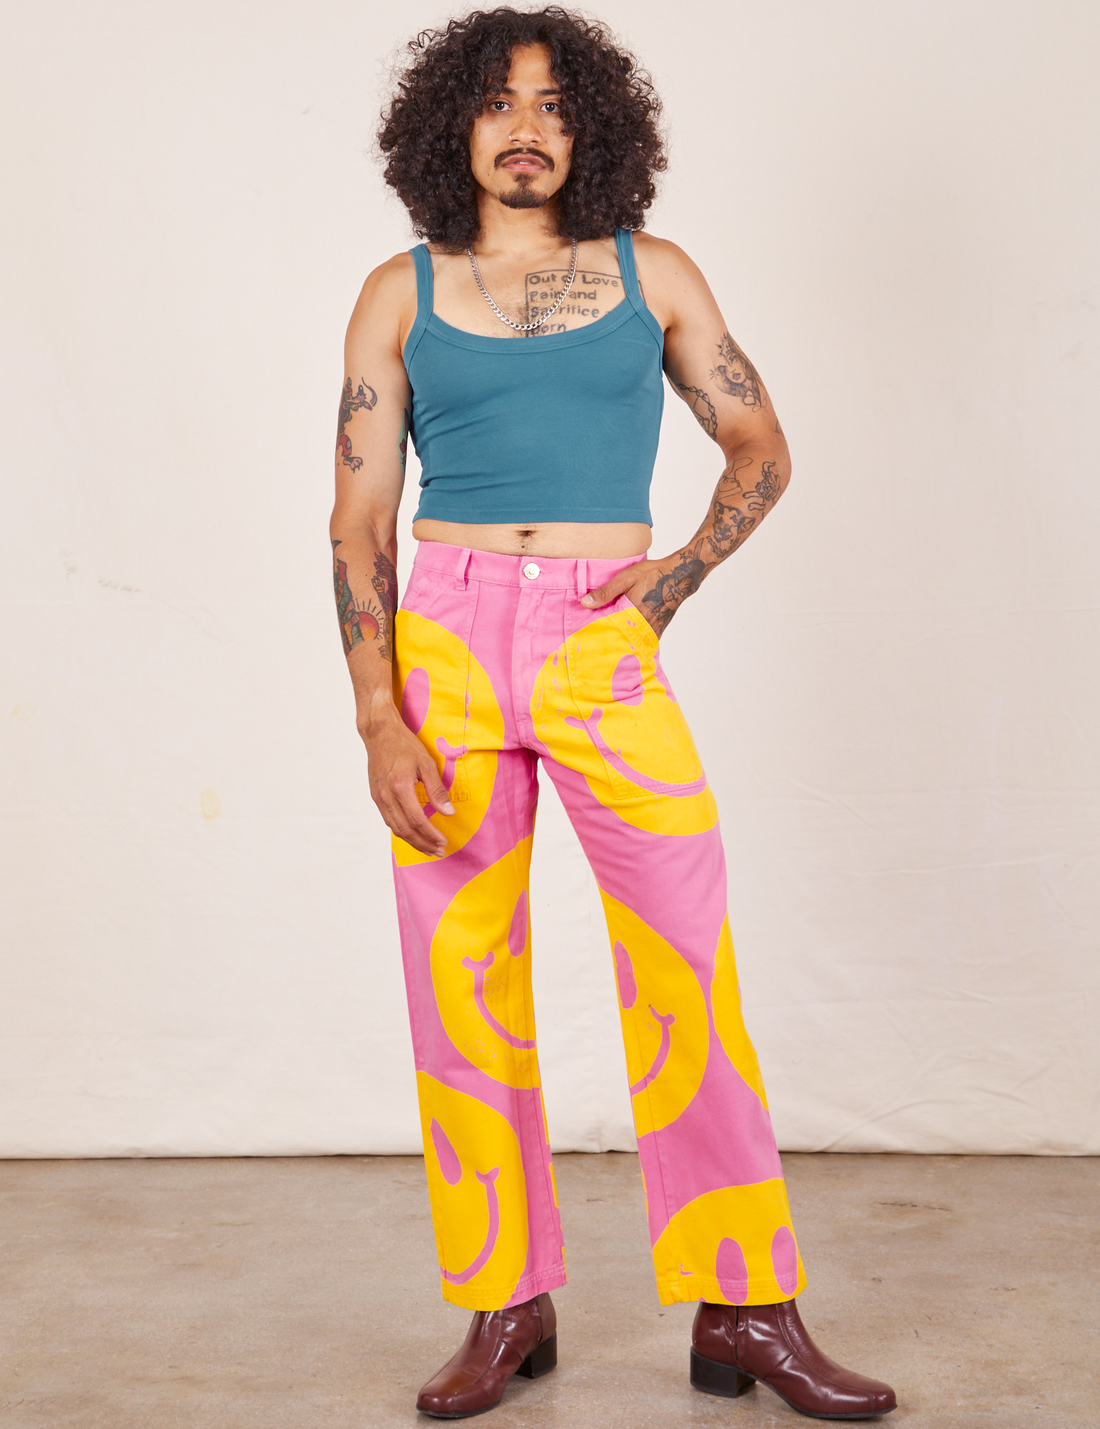 Jesse is 5'8" and wearing XS Icon Work Pants in Smilies paired with. marine blue Cropped Cami